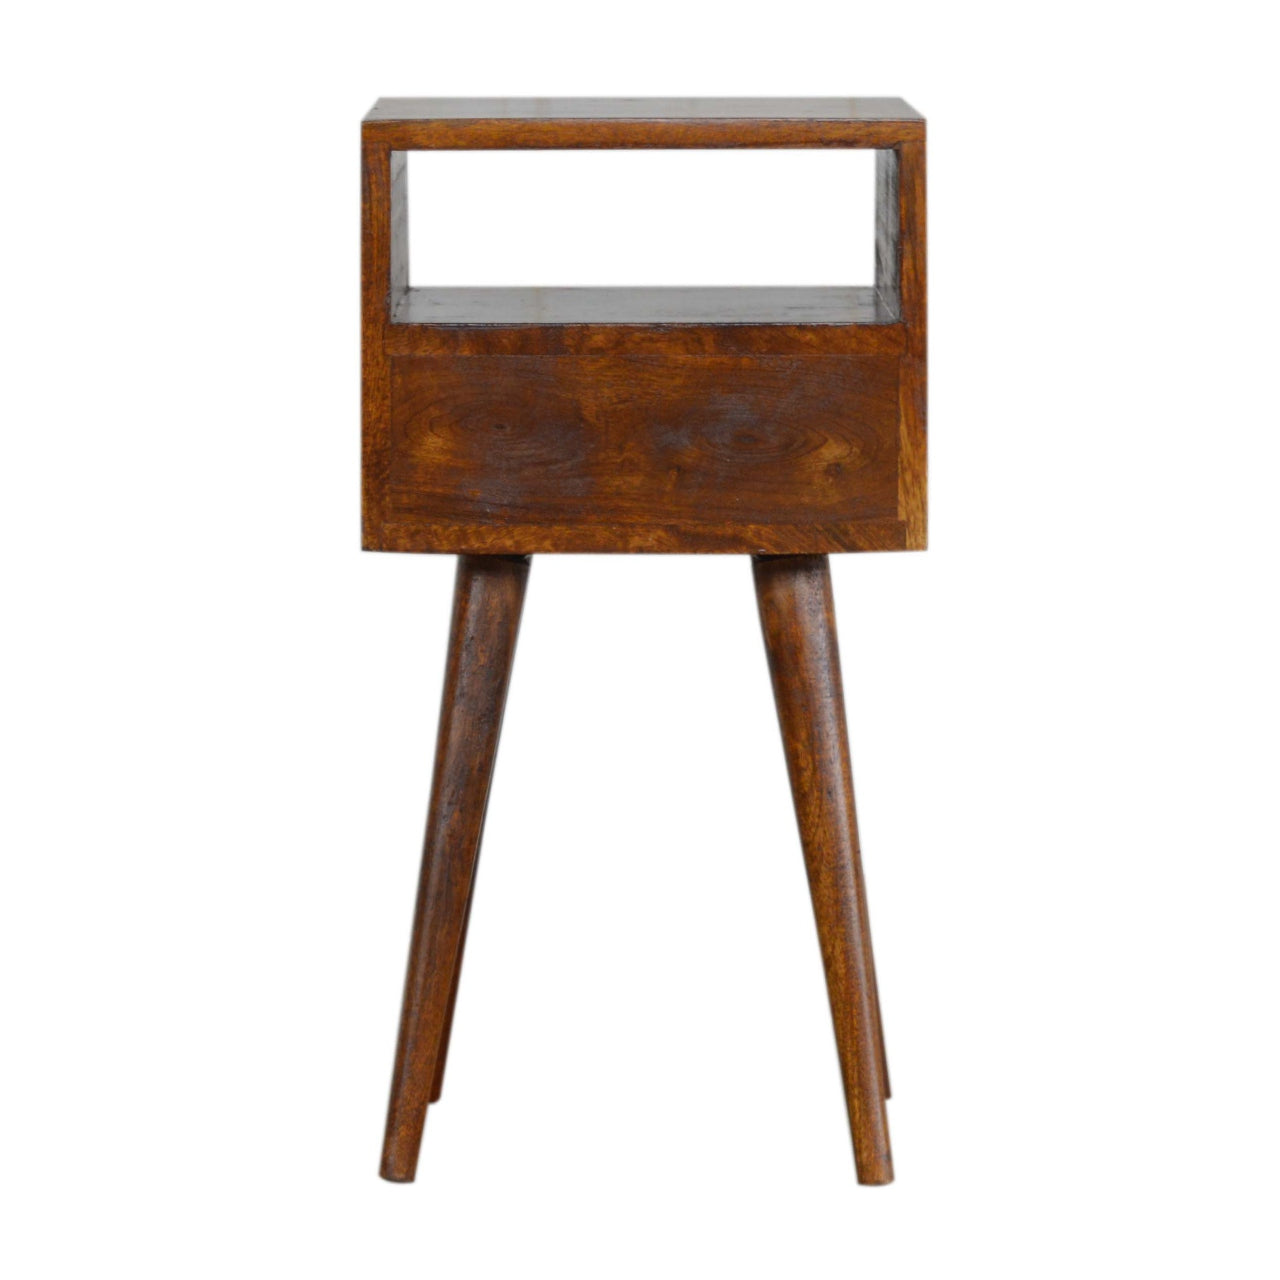 Solid Wood Small Chestnut Finish Bedside